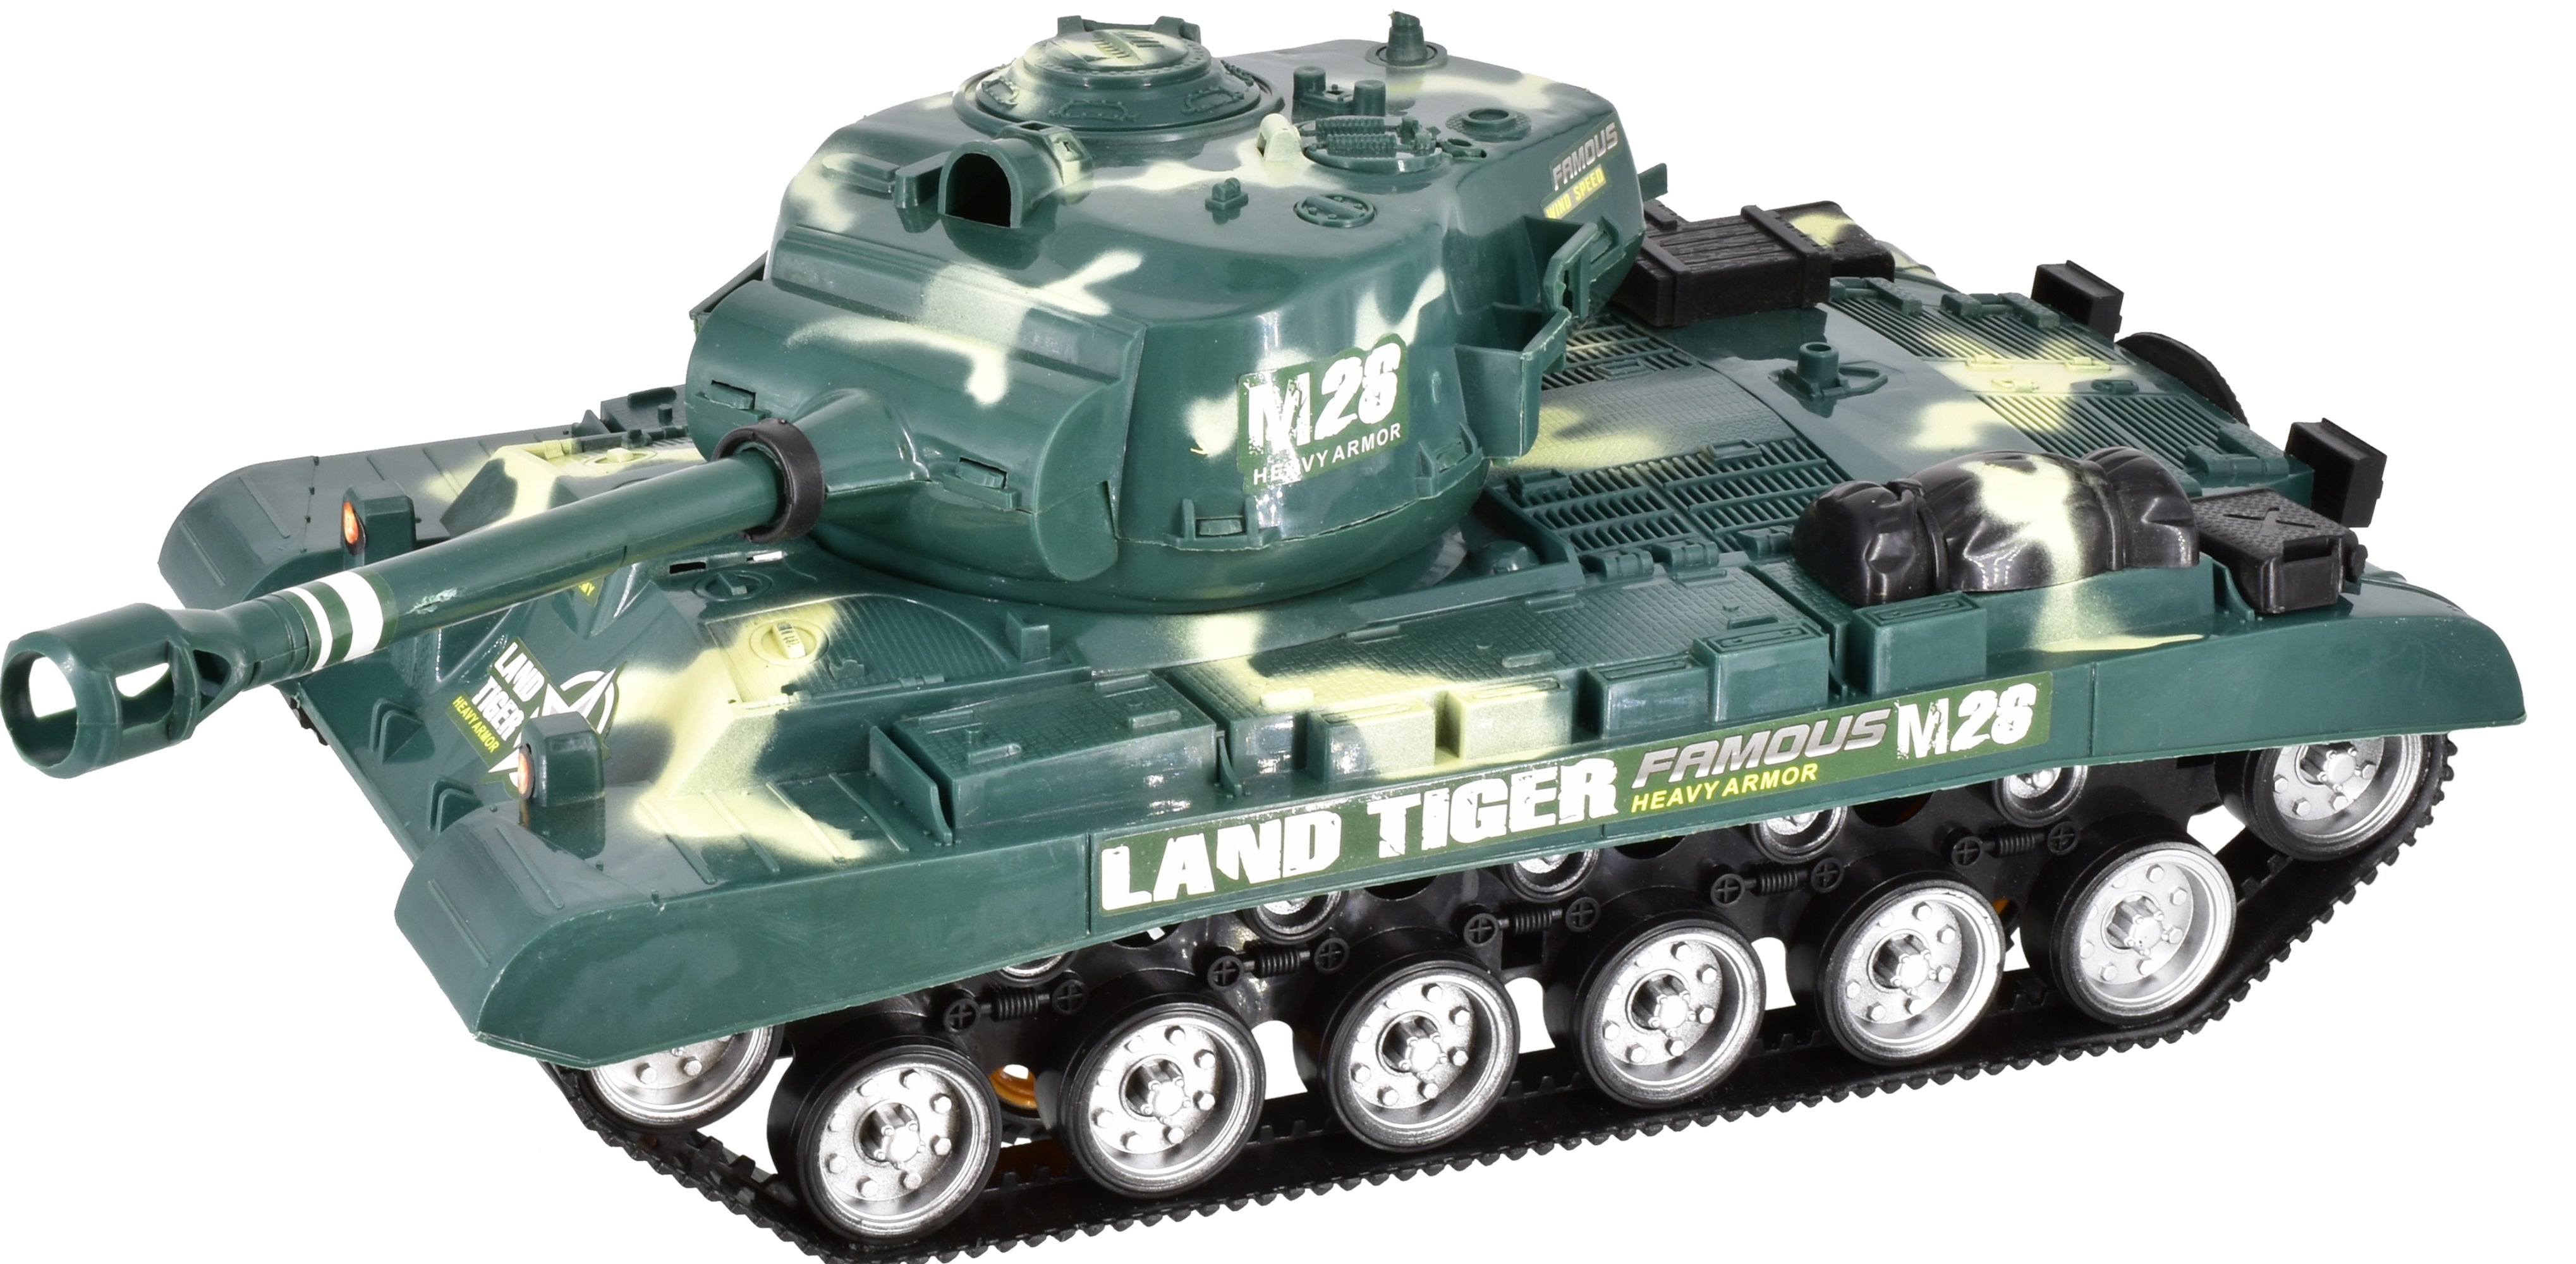 Combat Mission Large Friction Tank And Soldiers